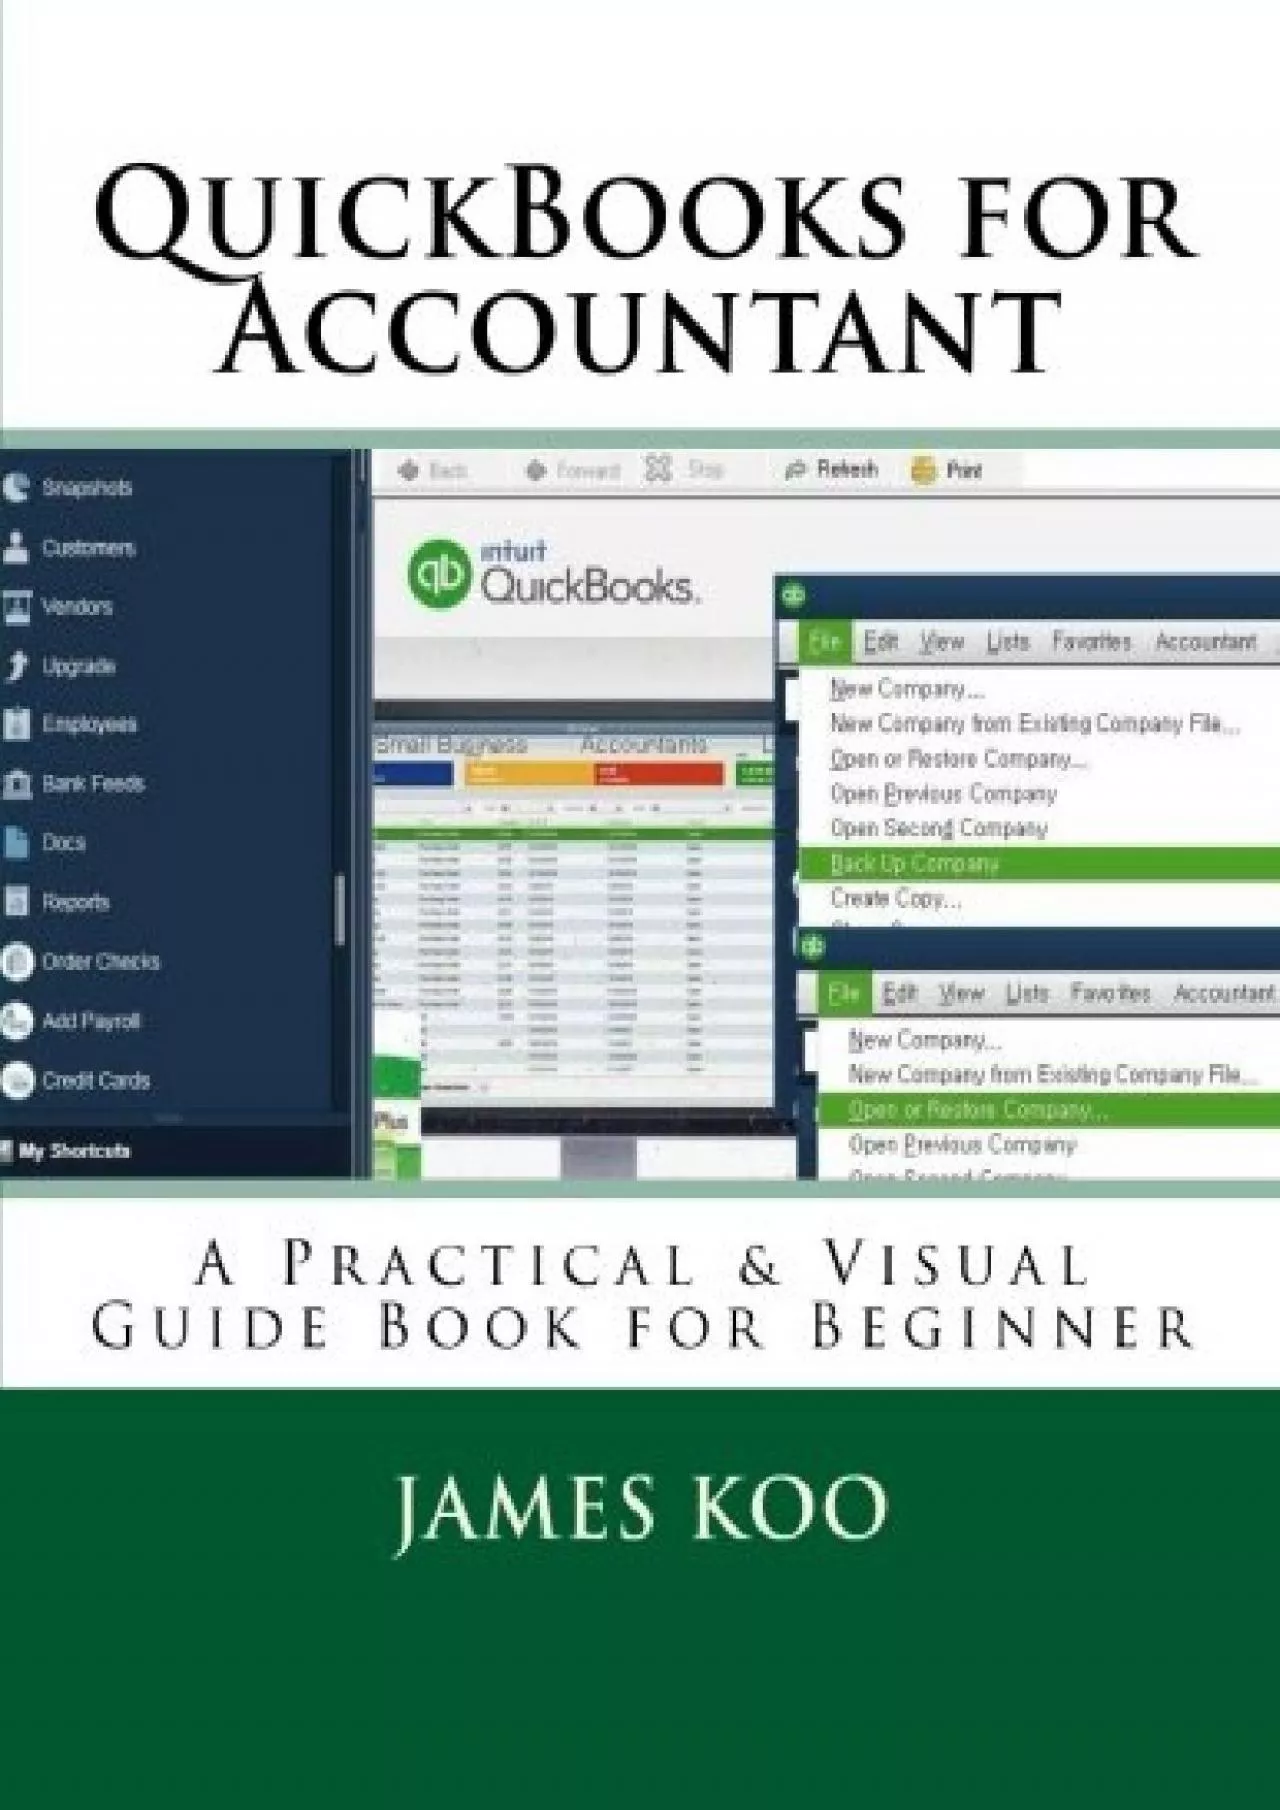 (EBOOK)-QuickBooks for Accountant: A Practical  Visual Guide Book for Beginner